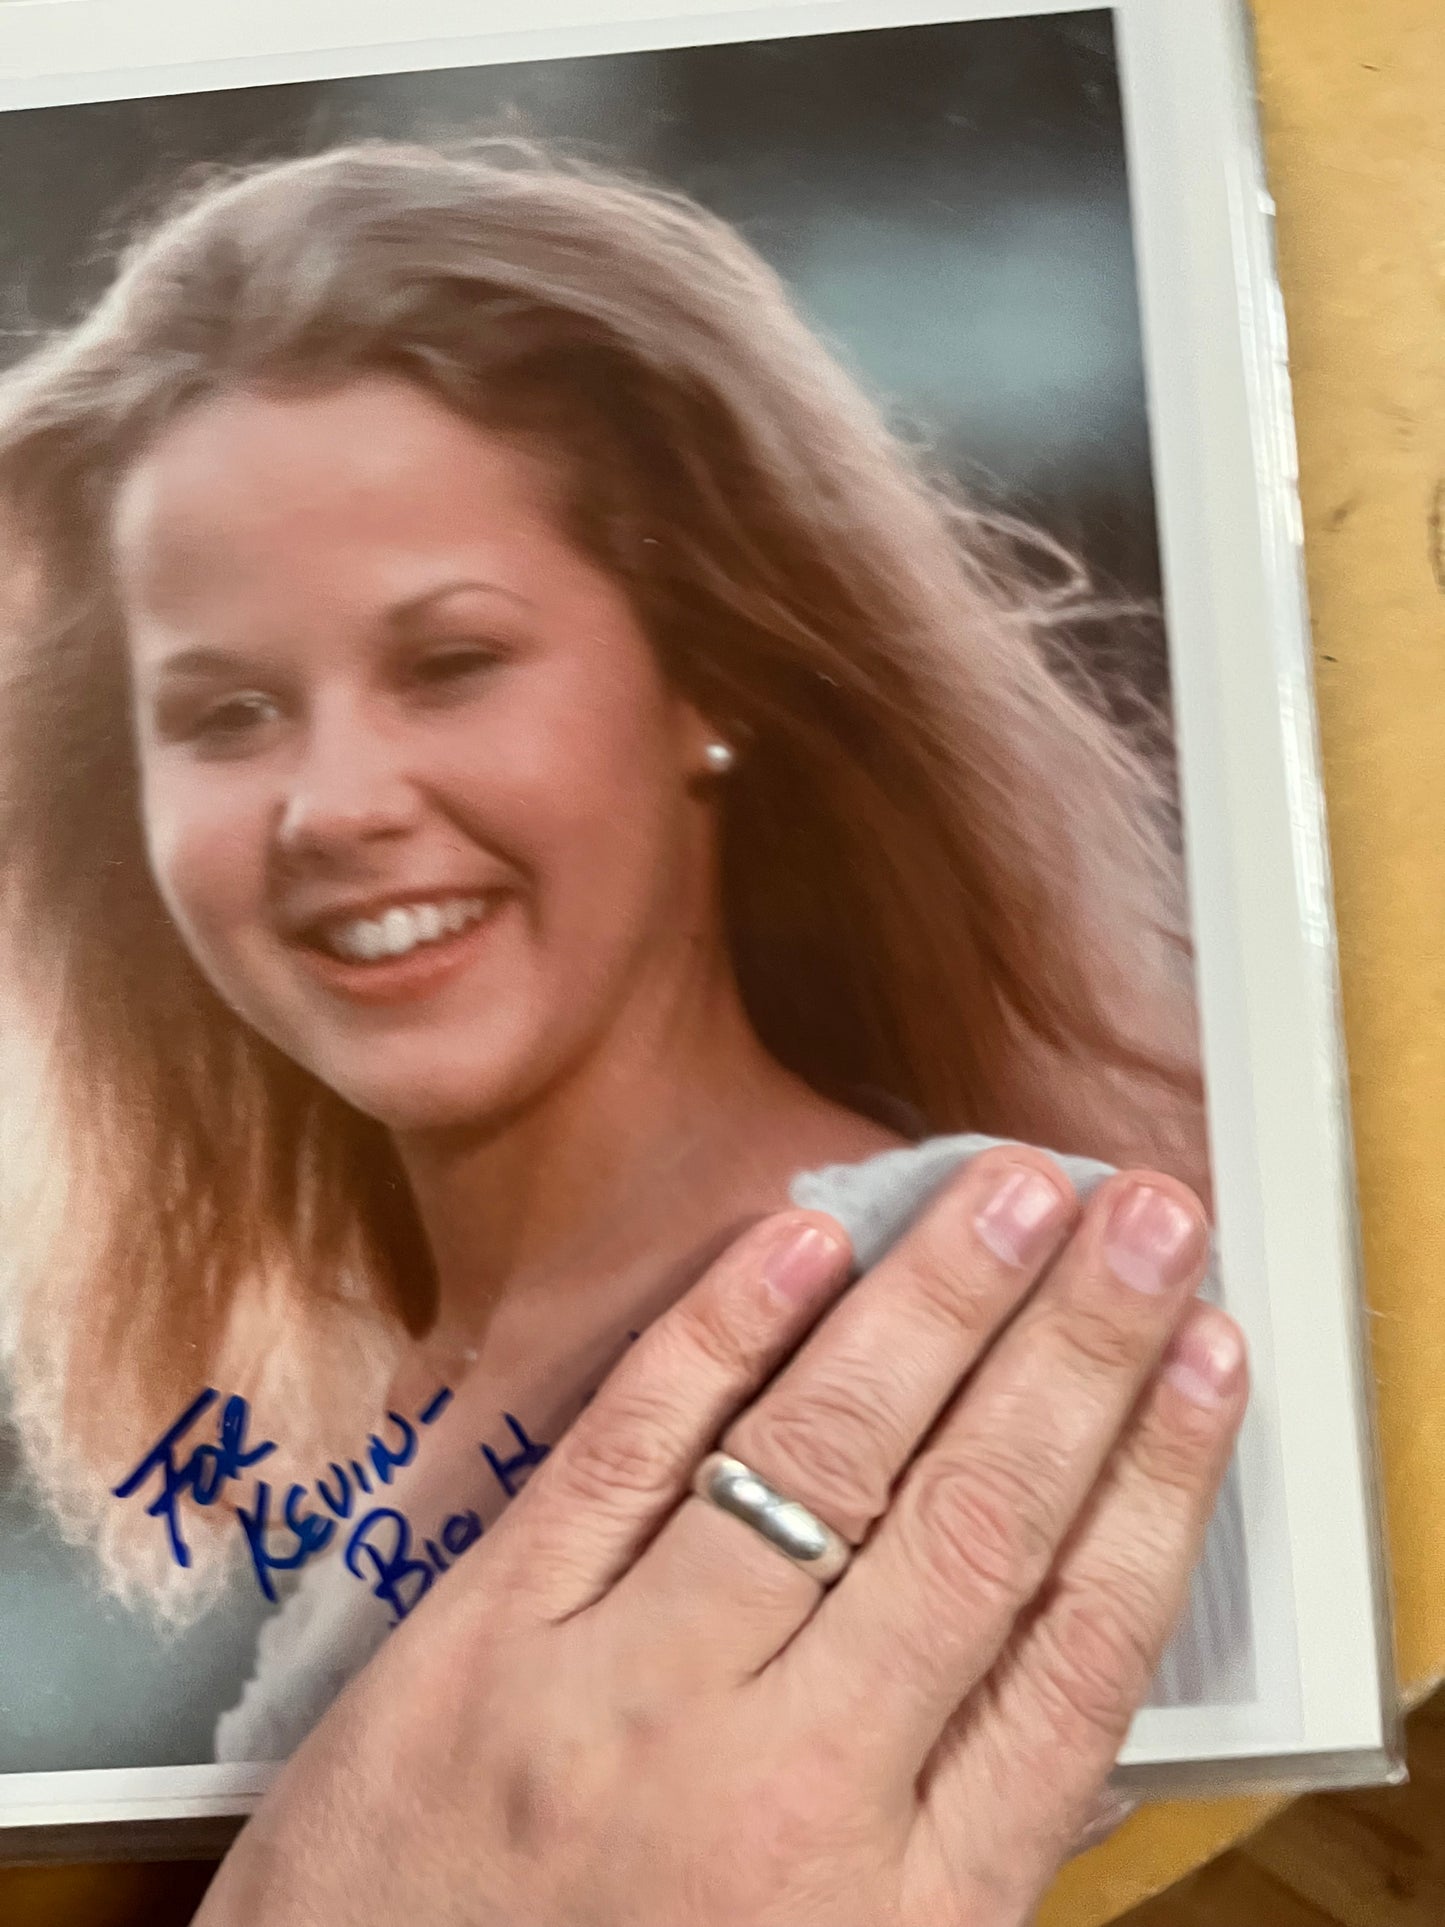 LINDA BLAIR, actress from The Exorcist, autograph